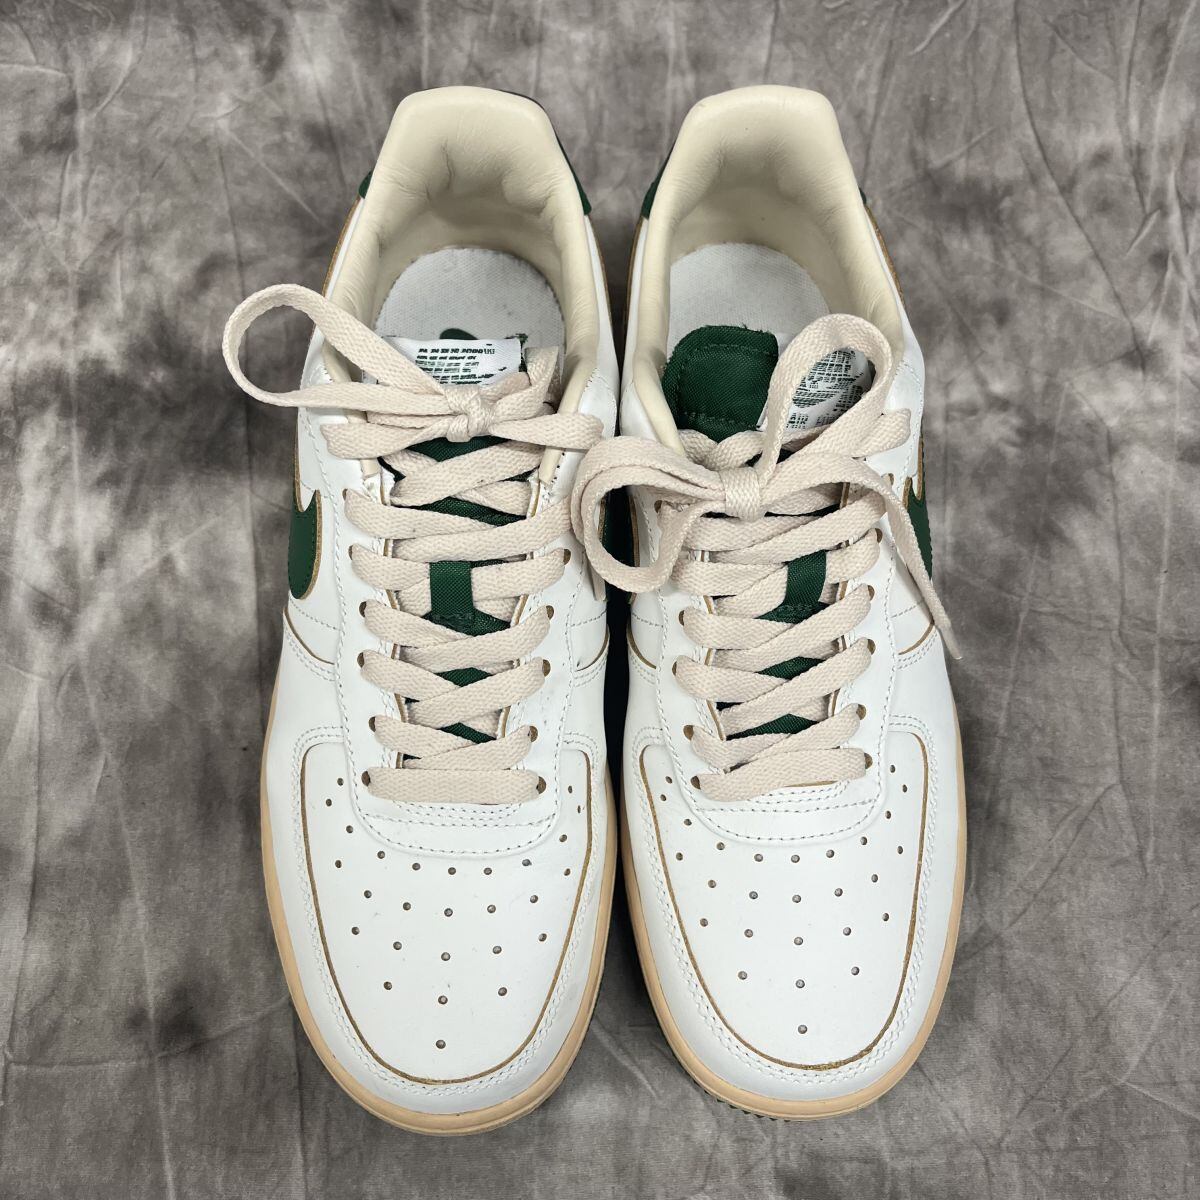 NIKE/ナイキ WMNS AIR FORCE 1 LOW '07 LV8 Green and Muslin